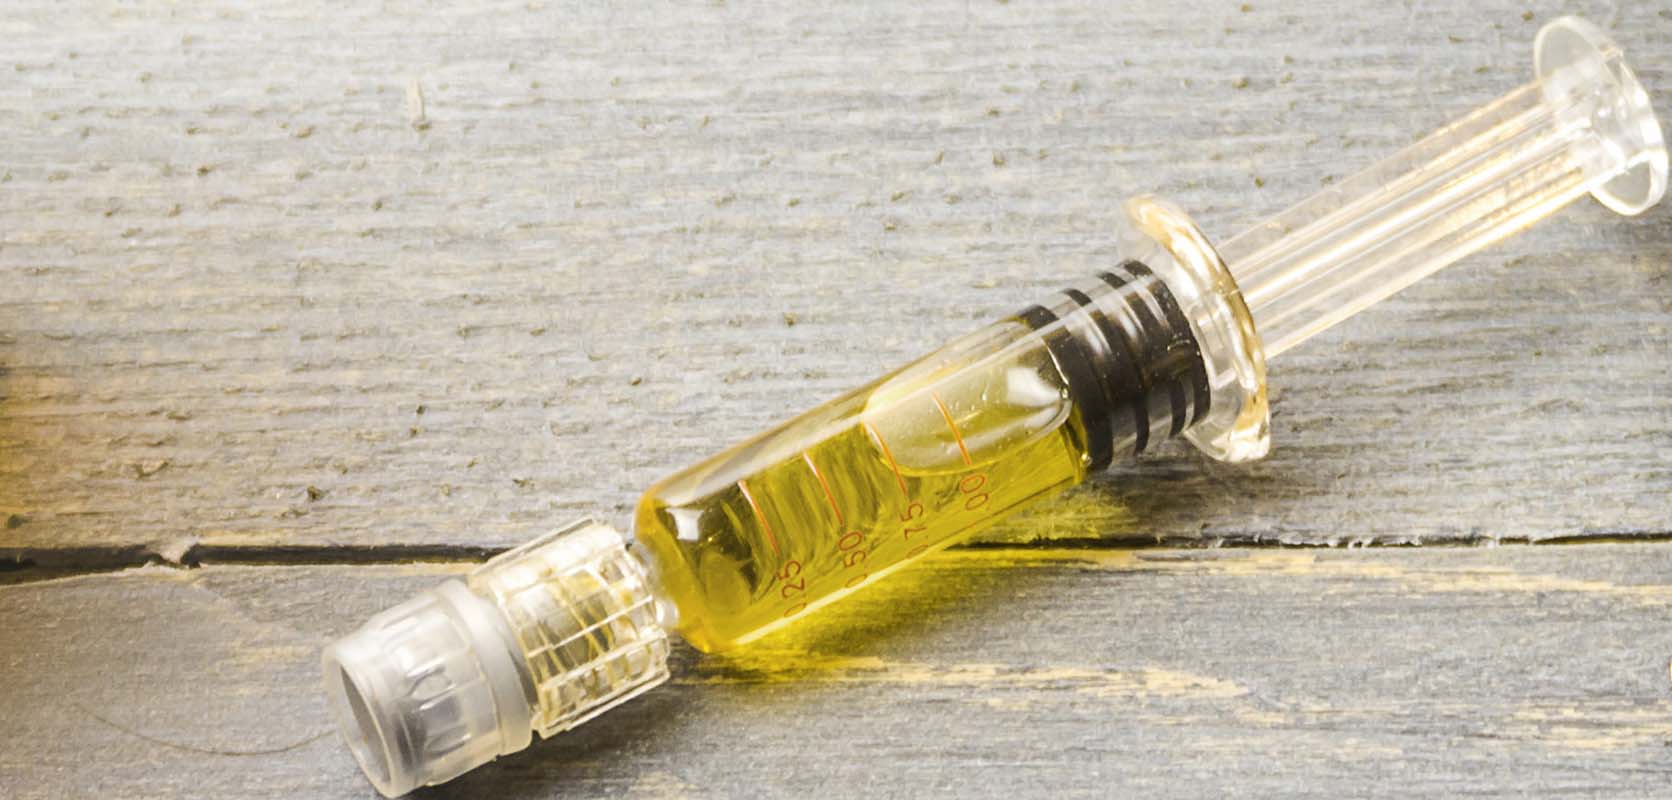 THC Distillate oil for sale from low price bud mail order marijuana online dispensary in canada